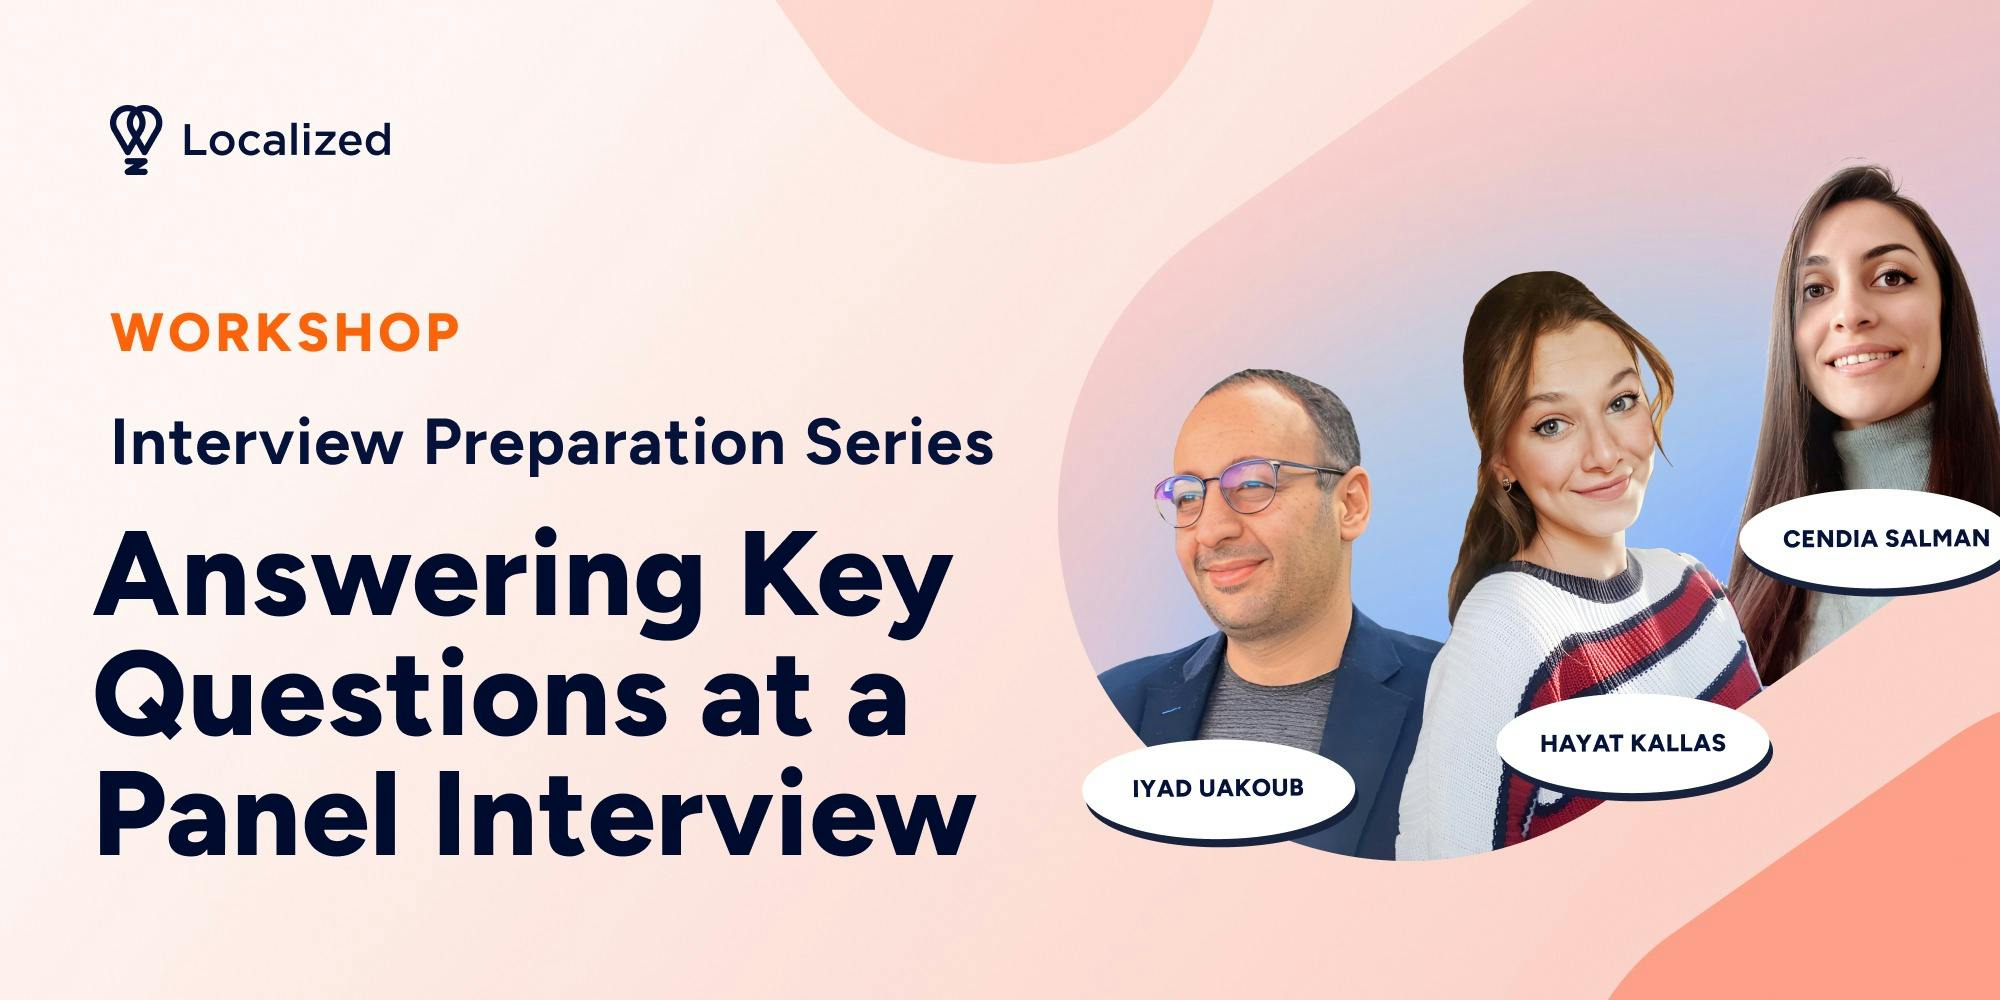 Workshop - Interview Preparation Series: How to Answer Key Questions at a Panel Interview for Global Companies